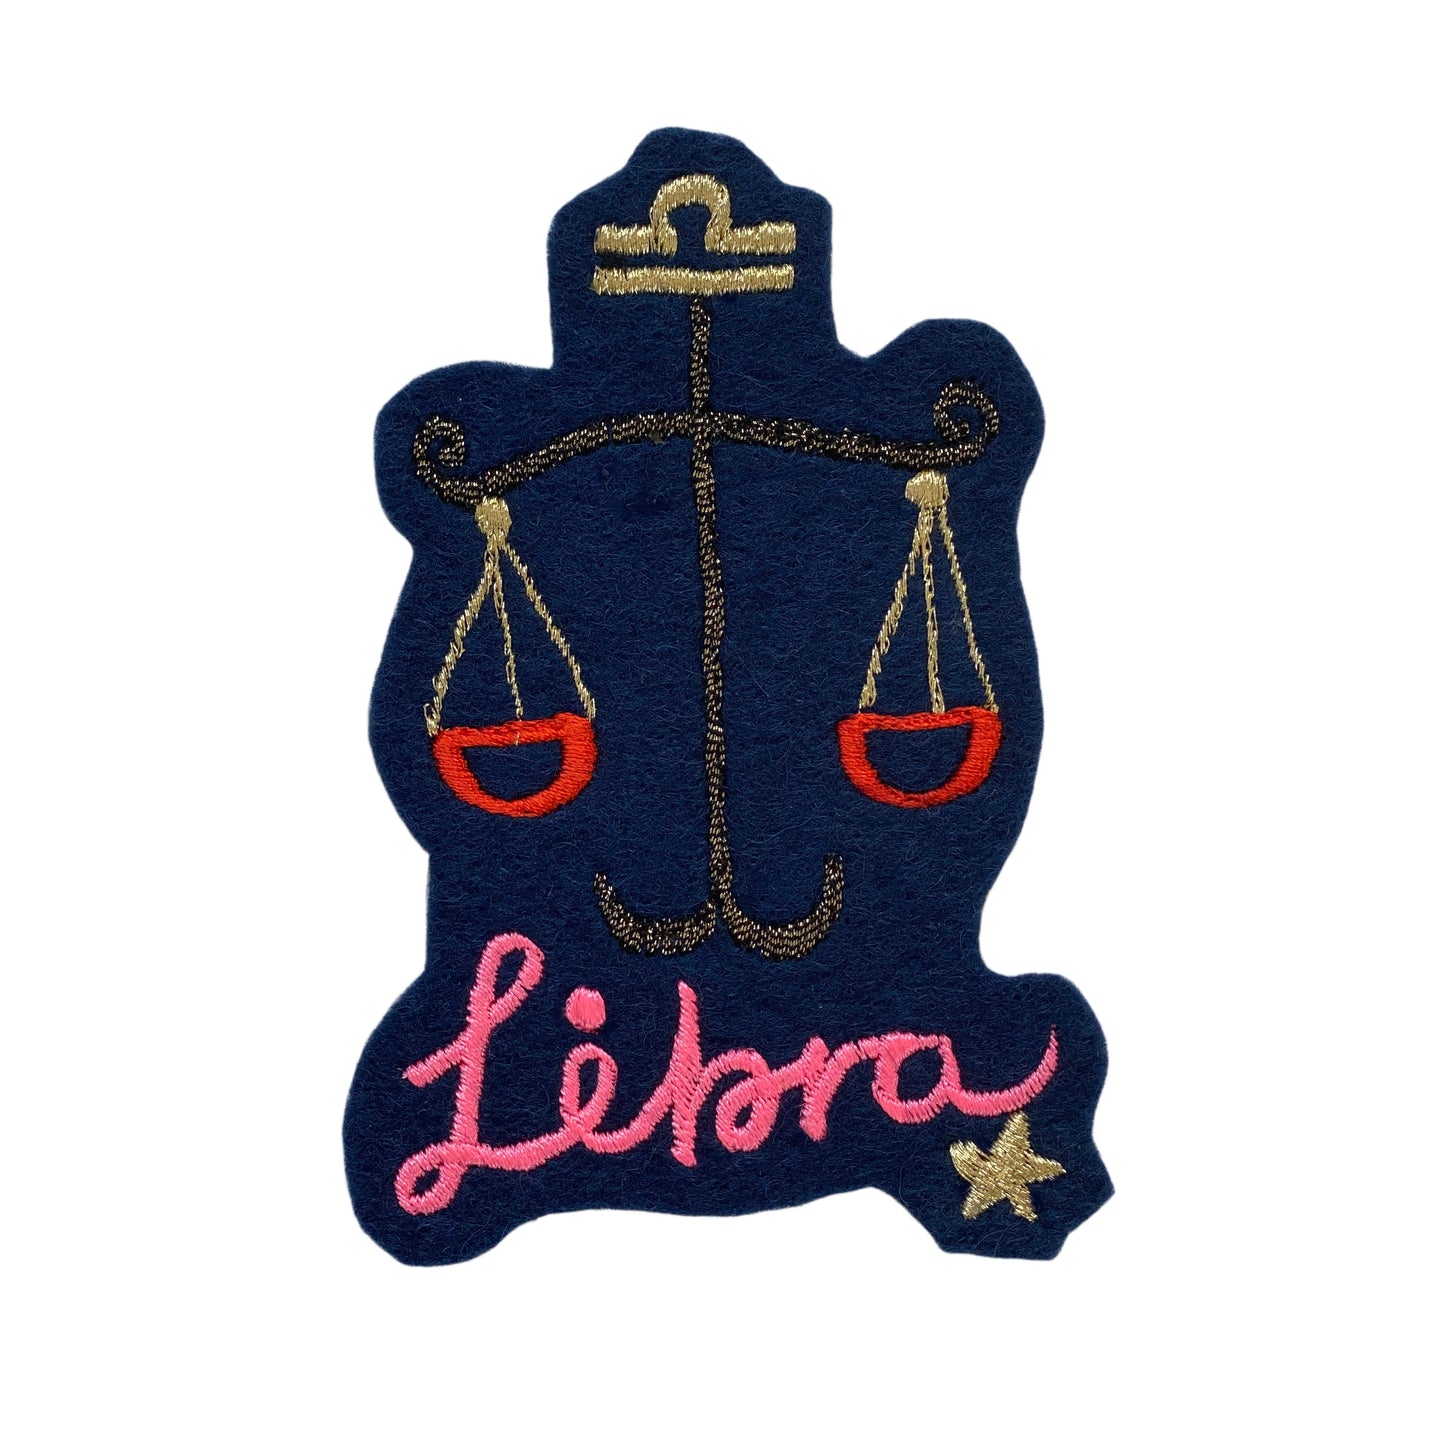 Libra embroidered patch on white background